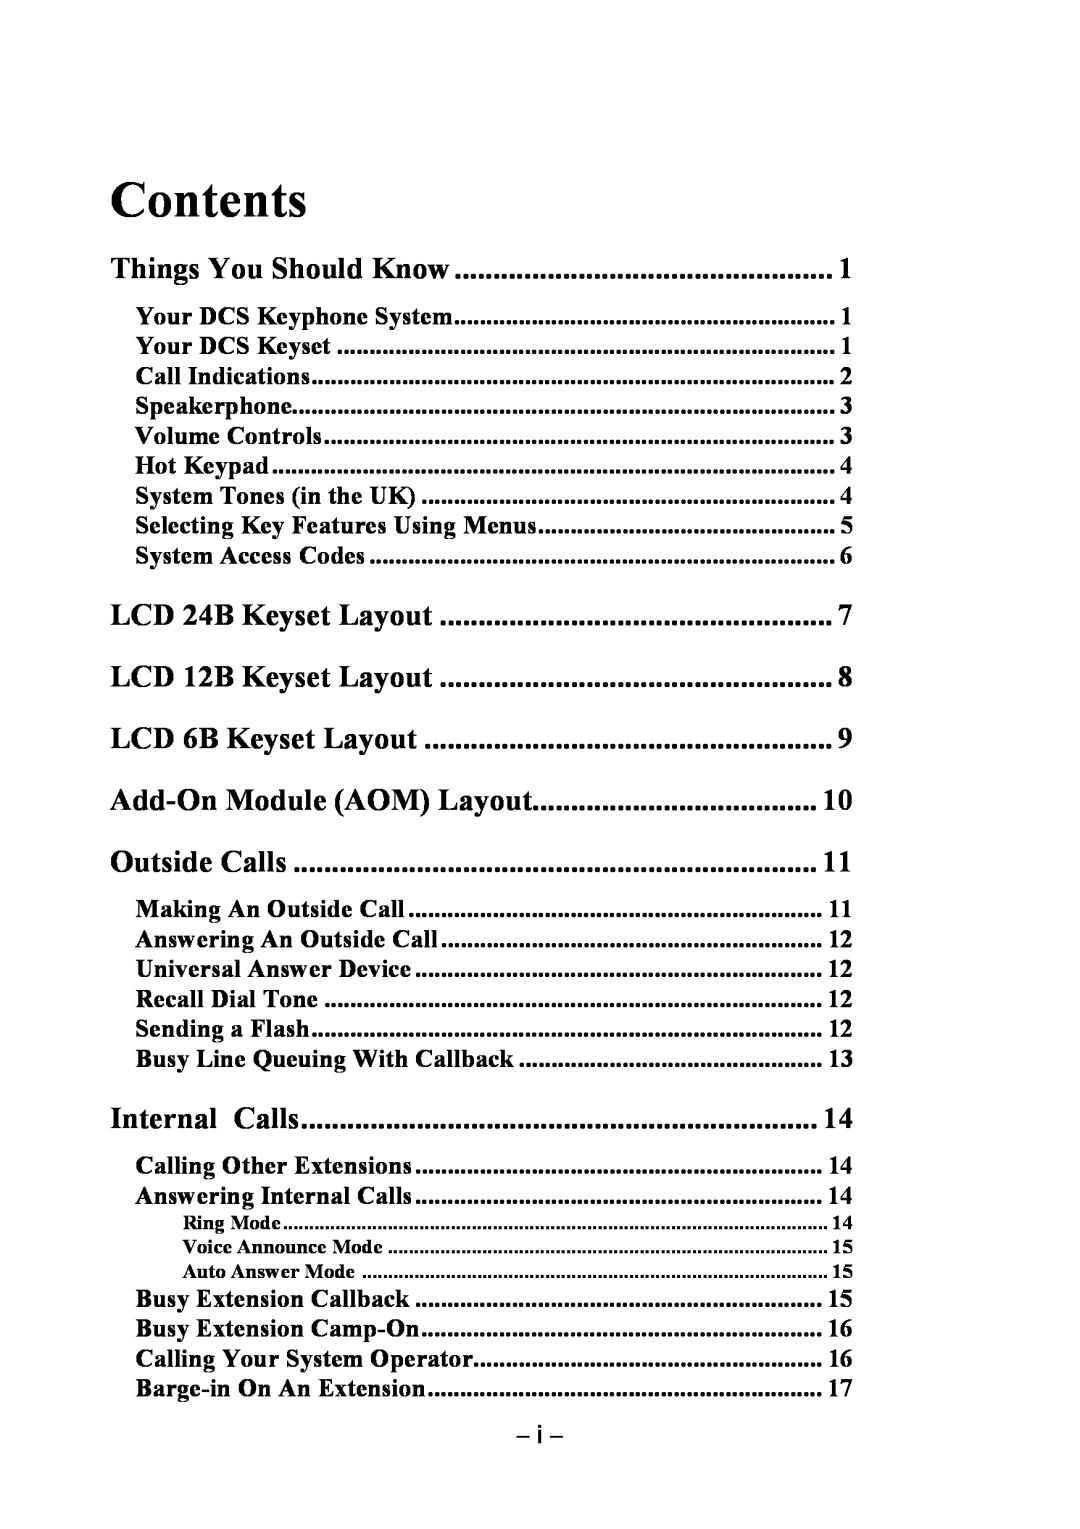 Samsung DCS KEYSET manual Things You Should Know, Add-On Module AOM Layout, Outside Calls, Internal Calls, Contents 